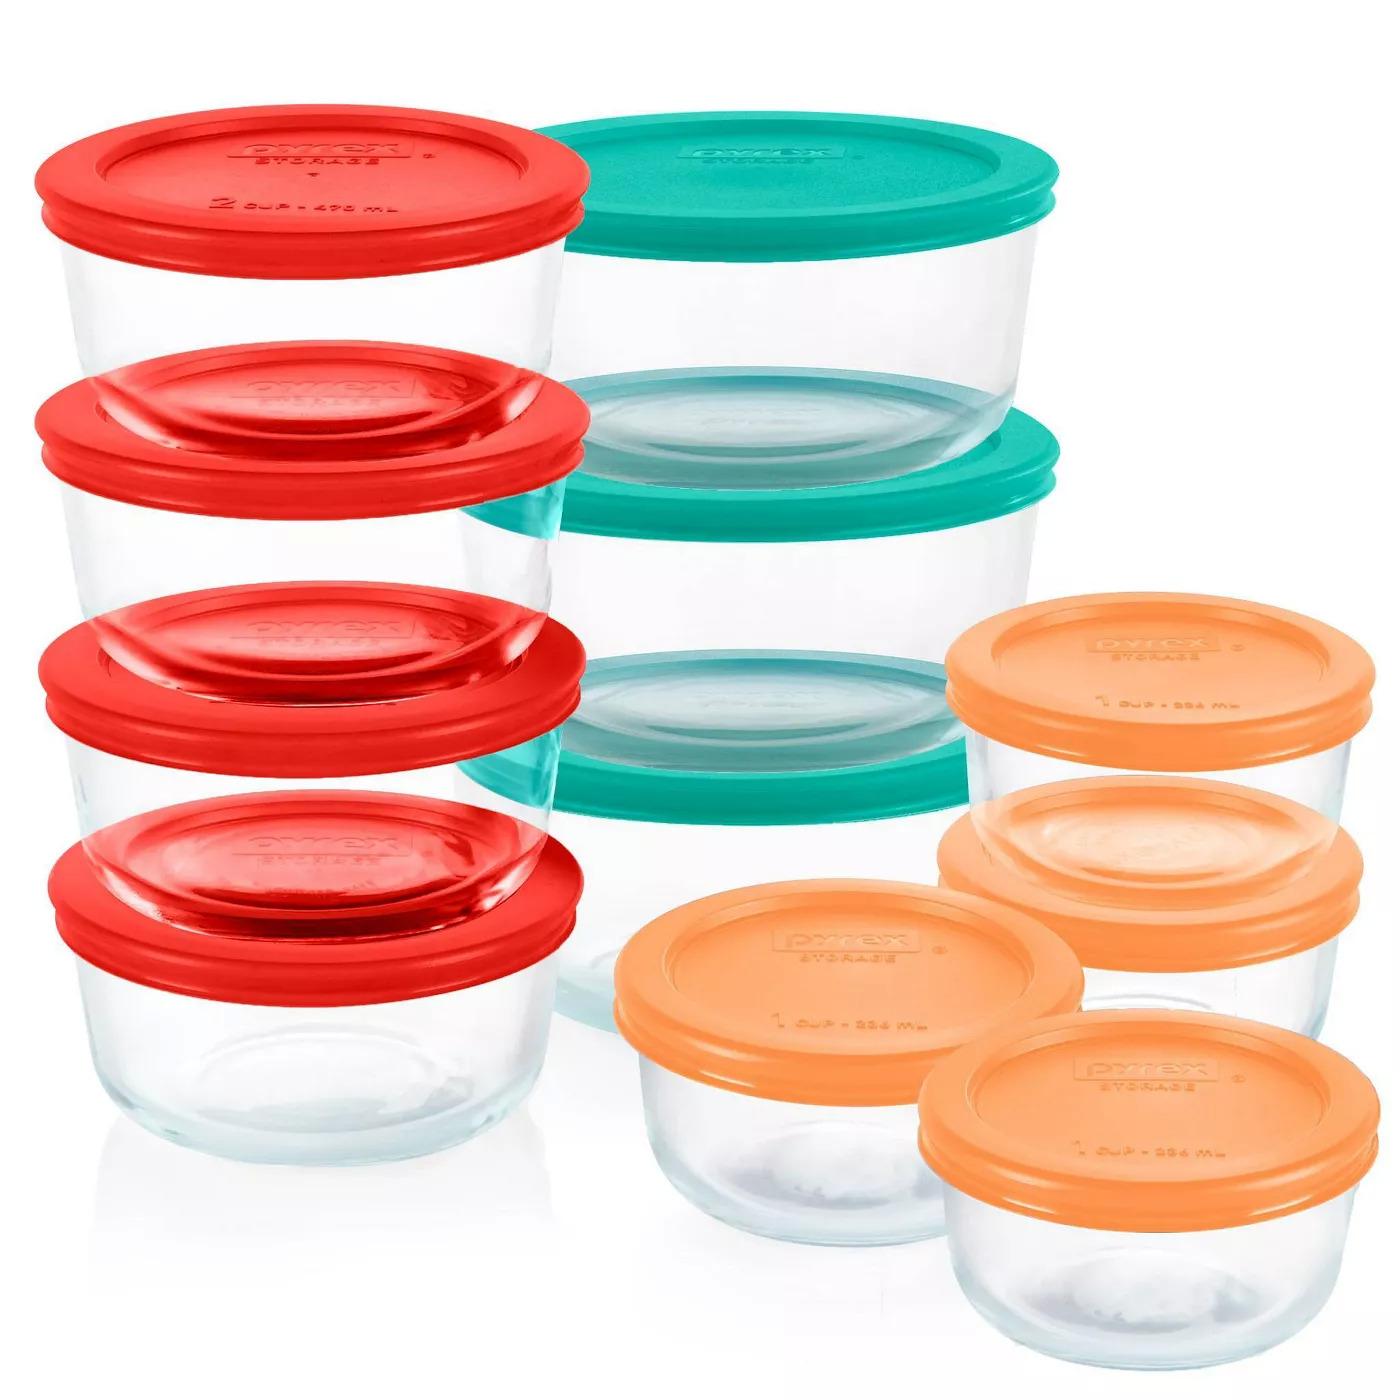 22-Piece Pyrex Glass Food Storage Container Set for $19.99